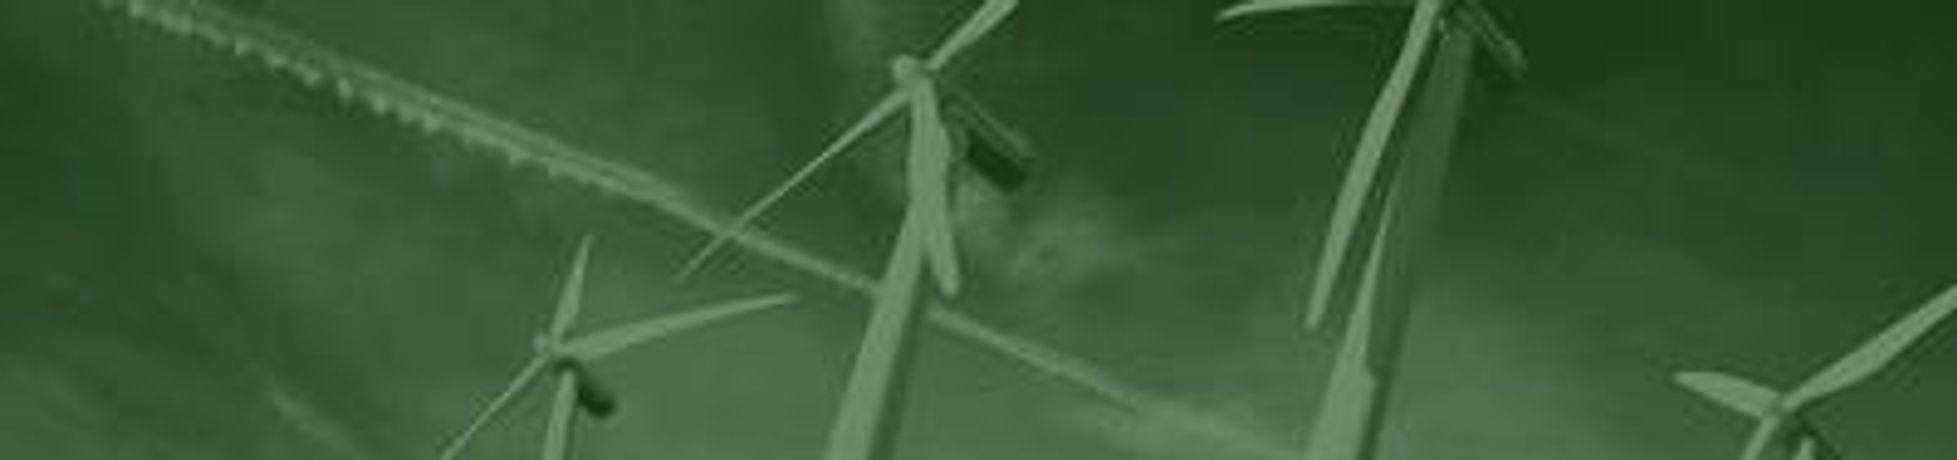 Strategic market research solutions for hydropower & renewable energy industry - Energy - Hydro Power